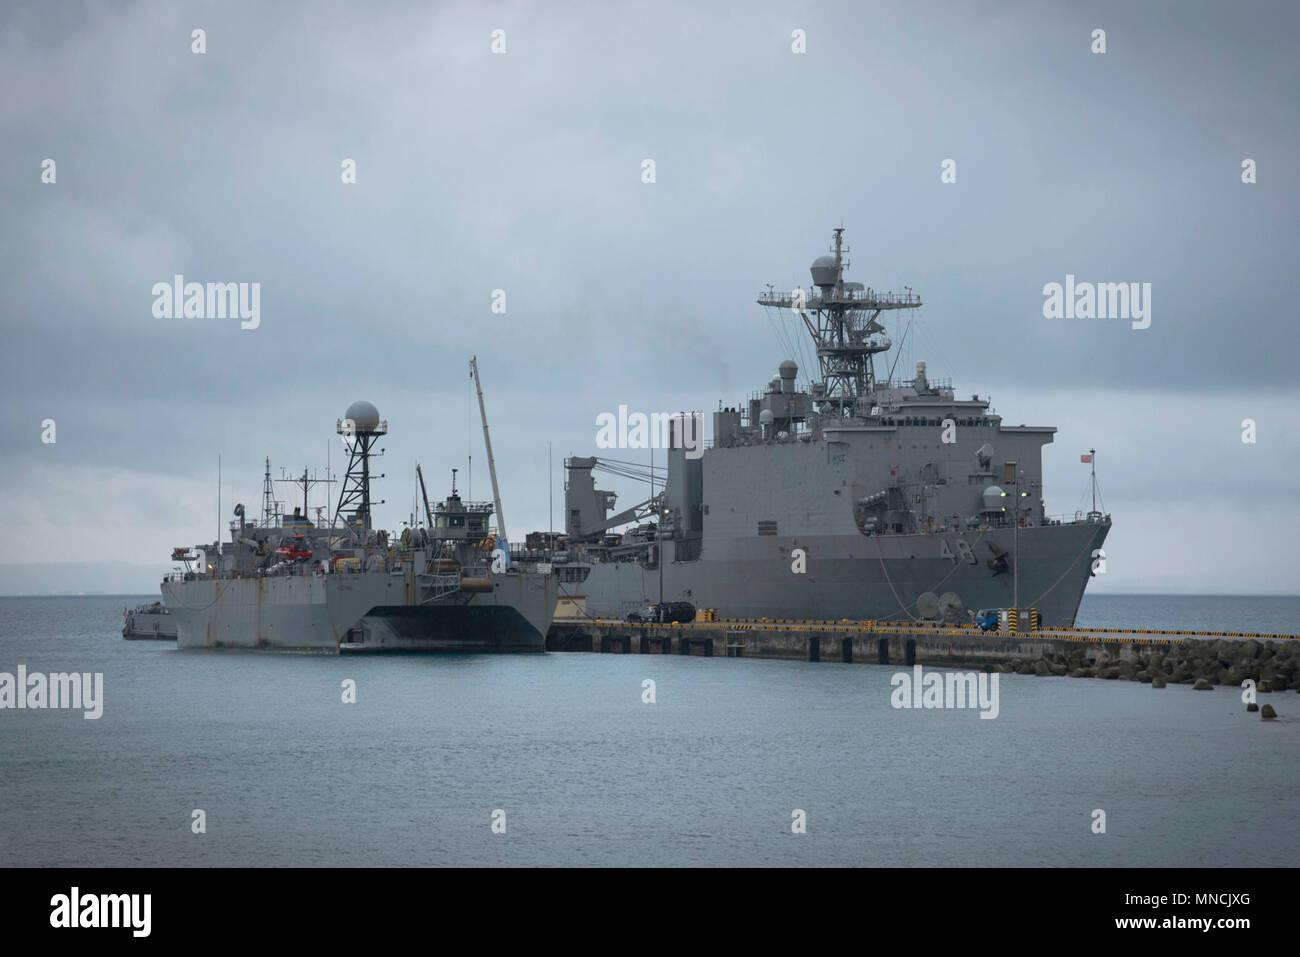 OKINAWA, Japan (March 16, 2018) The dock landing ship USS Ashland (LSD 48) is moored at White Beach Naval Facility in Okinawa, Japan, during the embarkation of the 31st Marine Expeditionary Unit (31st MEU). Ashland is part of the Wasp Expeditionary Strike Group, which is operating in the Indo-Pacific region as part of a regularly scheduled patrol that provides a rapid-response capability in the event of a regional contingency or natural disaster. (U.S. Navy Stock Photo